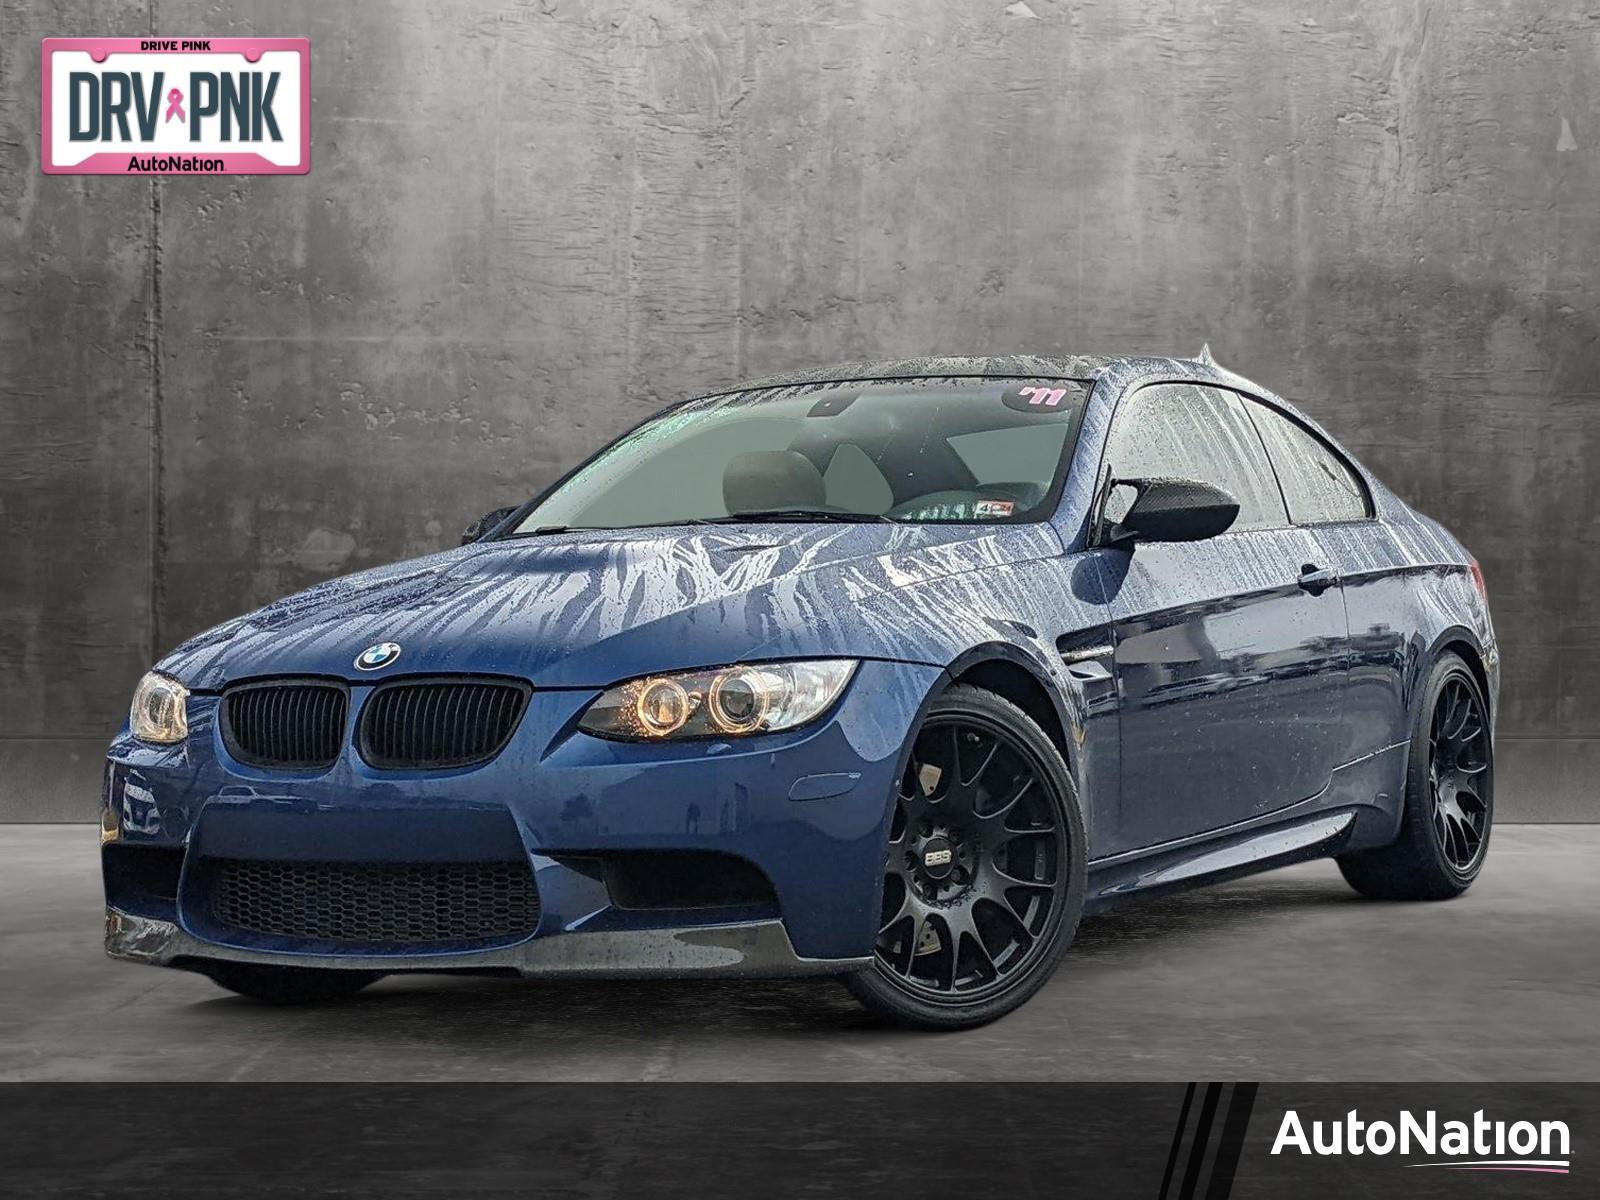 USED 2011 BMW M3 for sale in Sterling, VA, 20166 - AutoNation